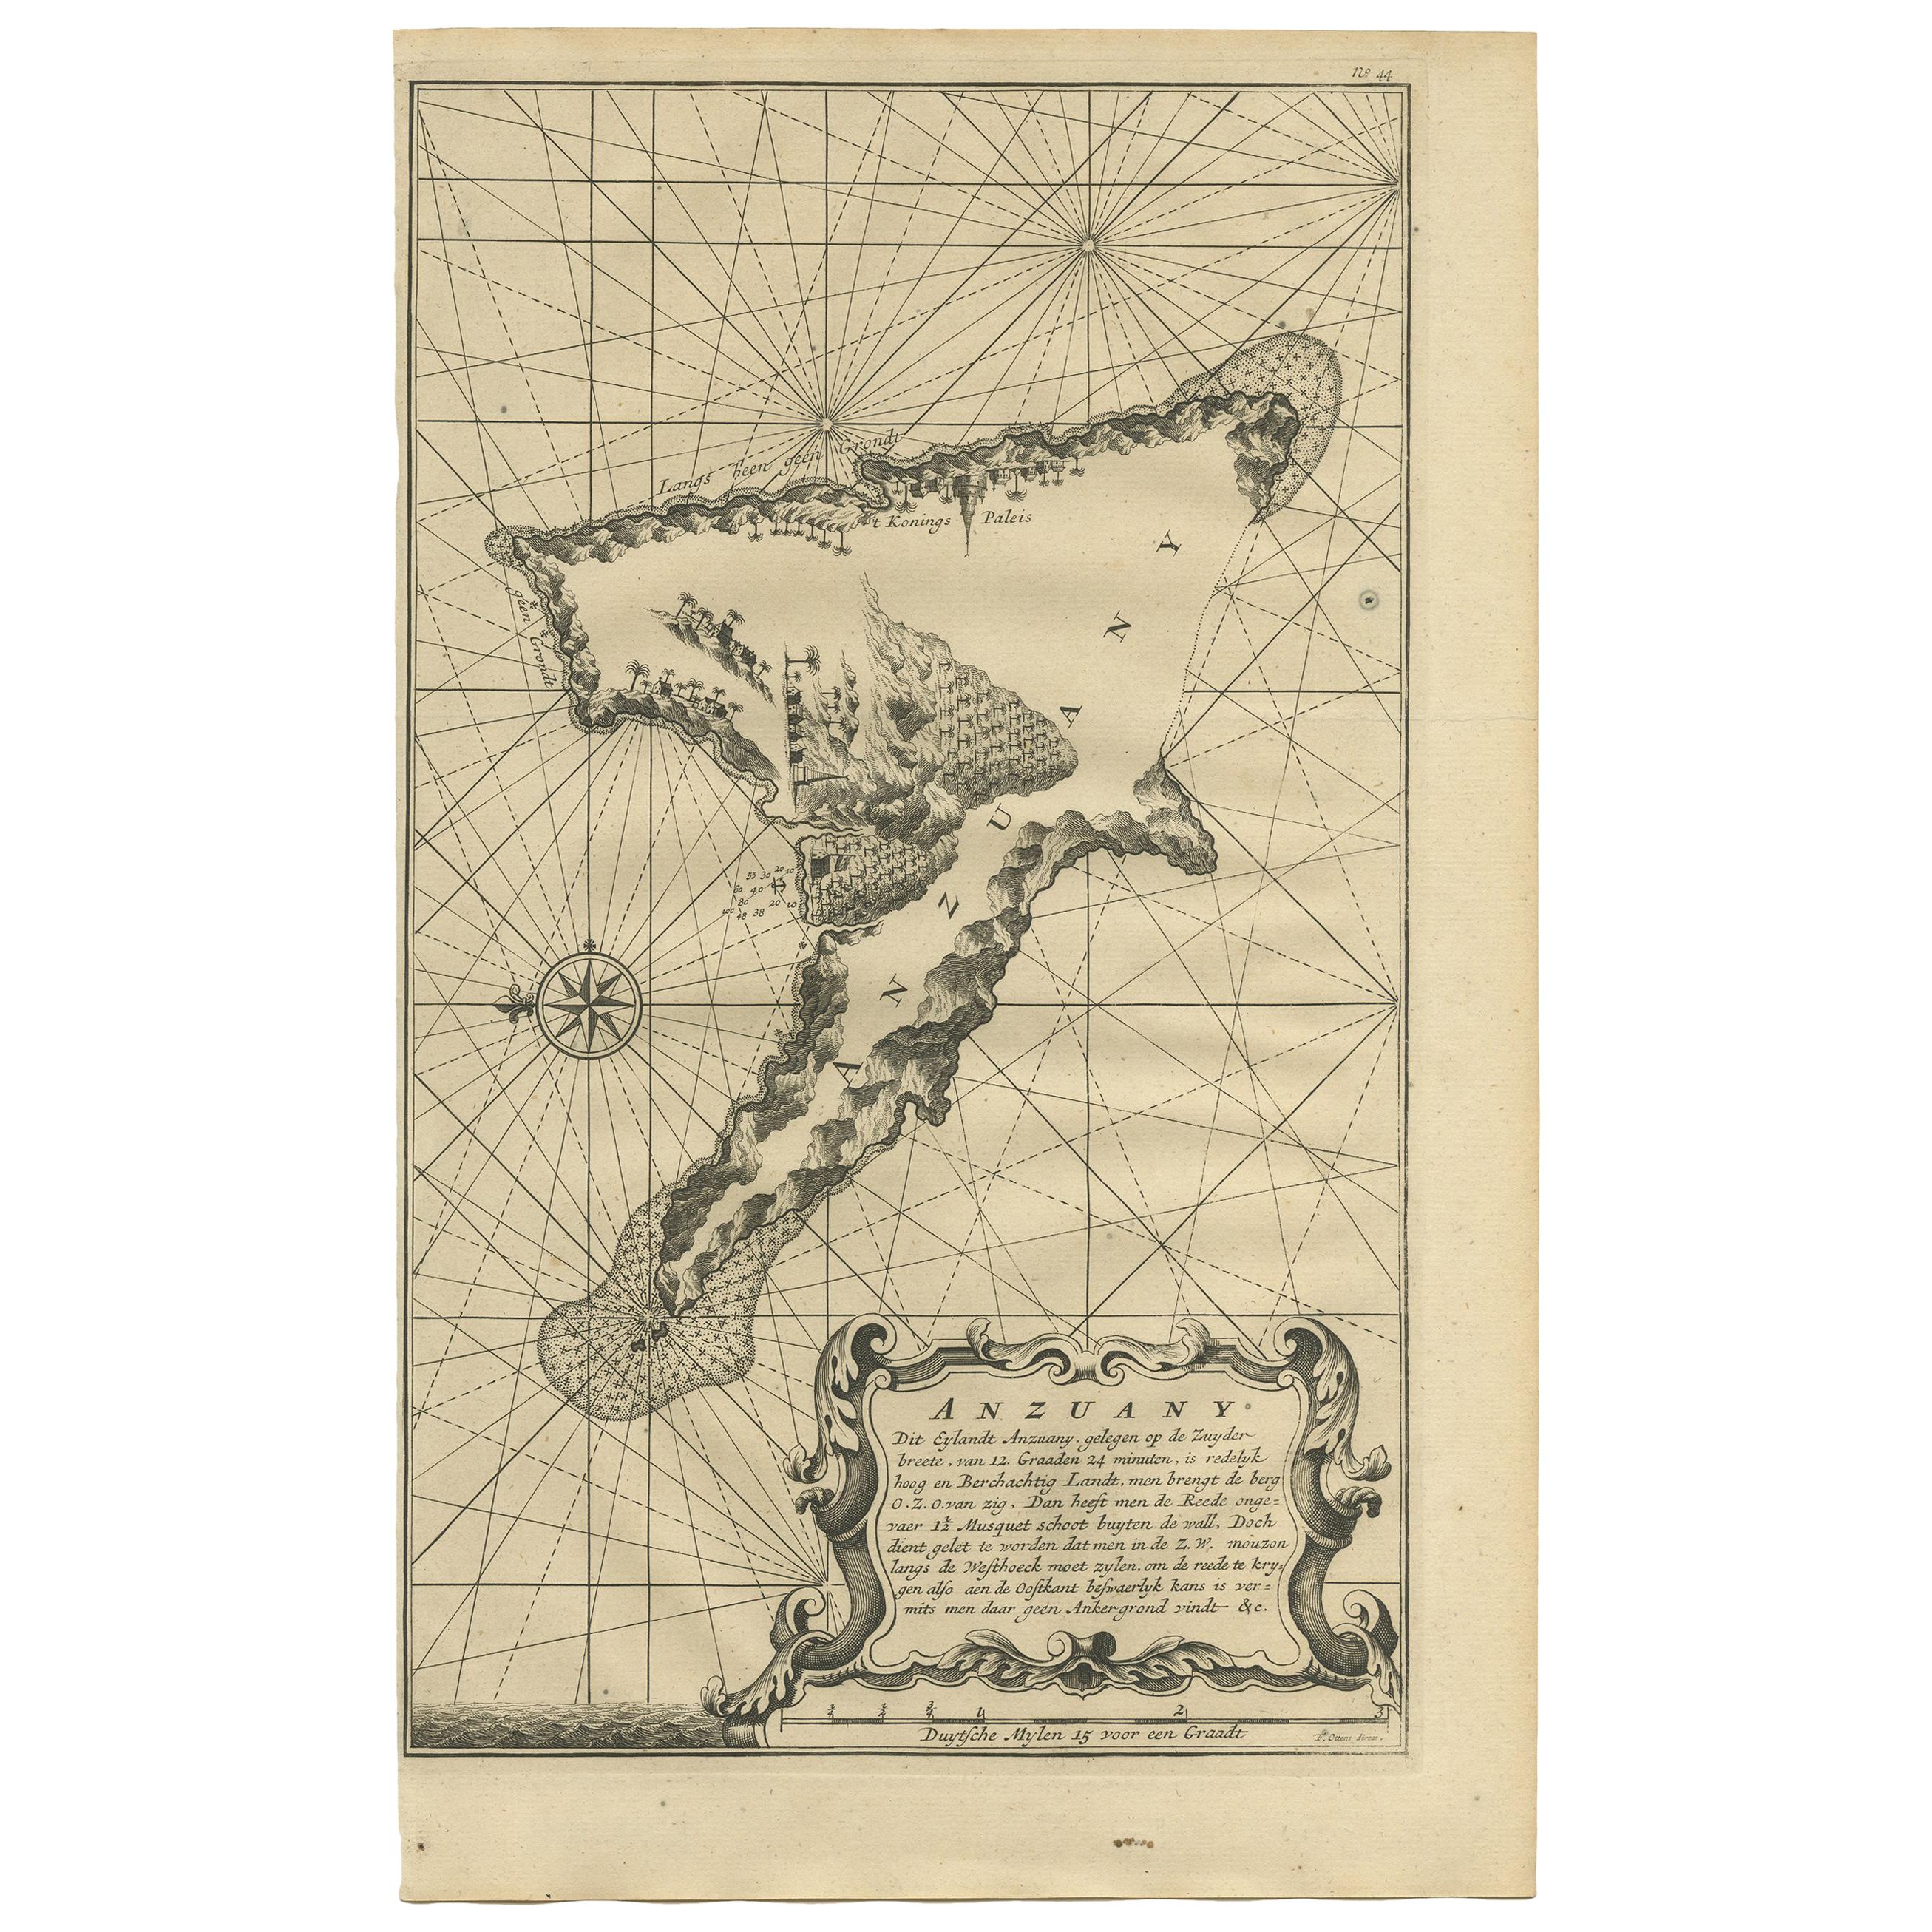 Antique Map of Anjouan Island by Valentijn, 1726